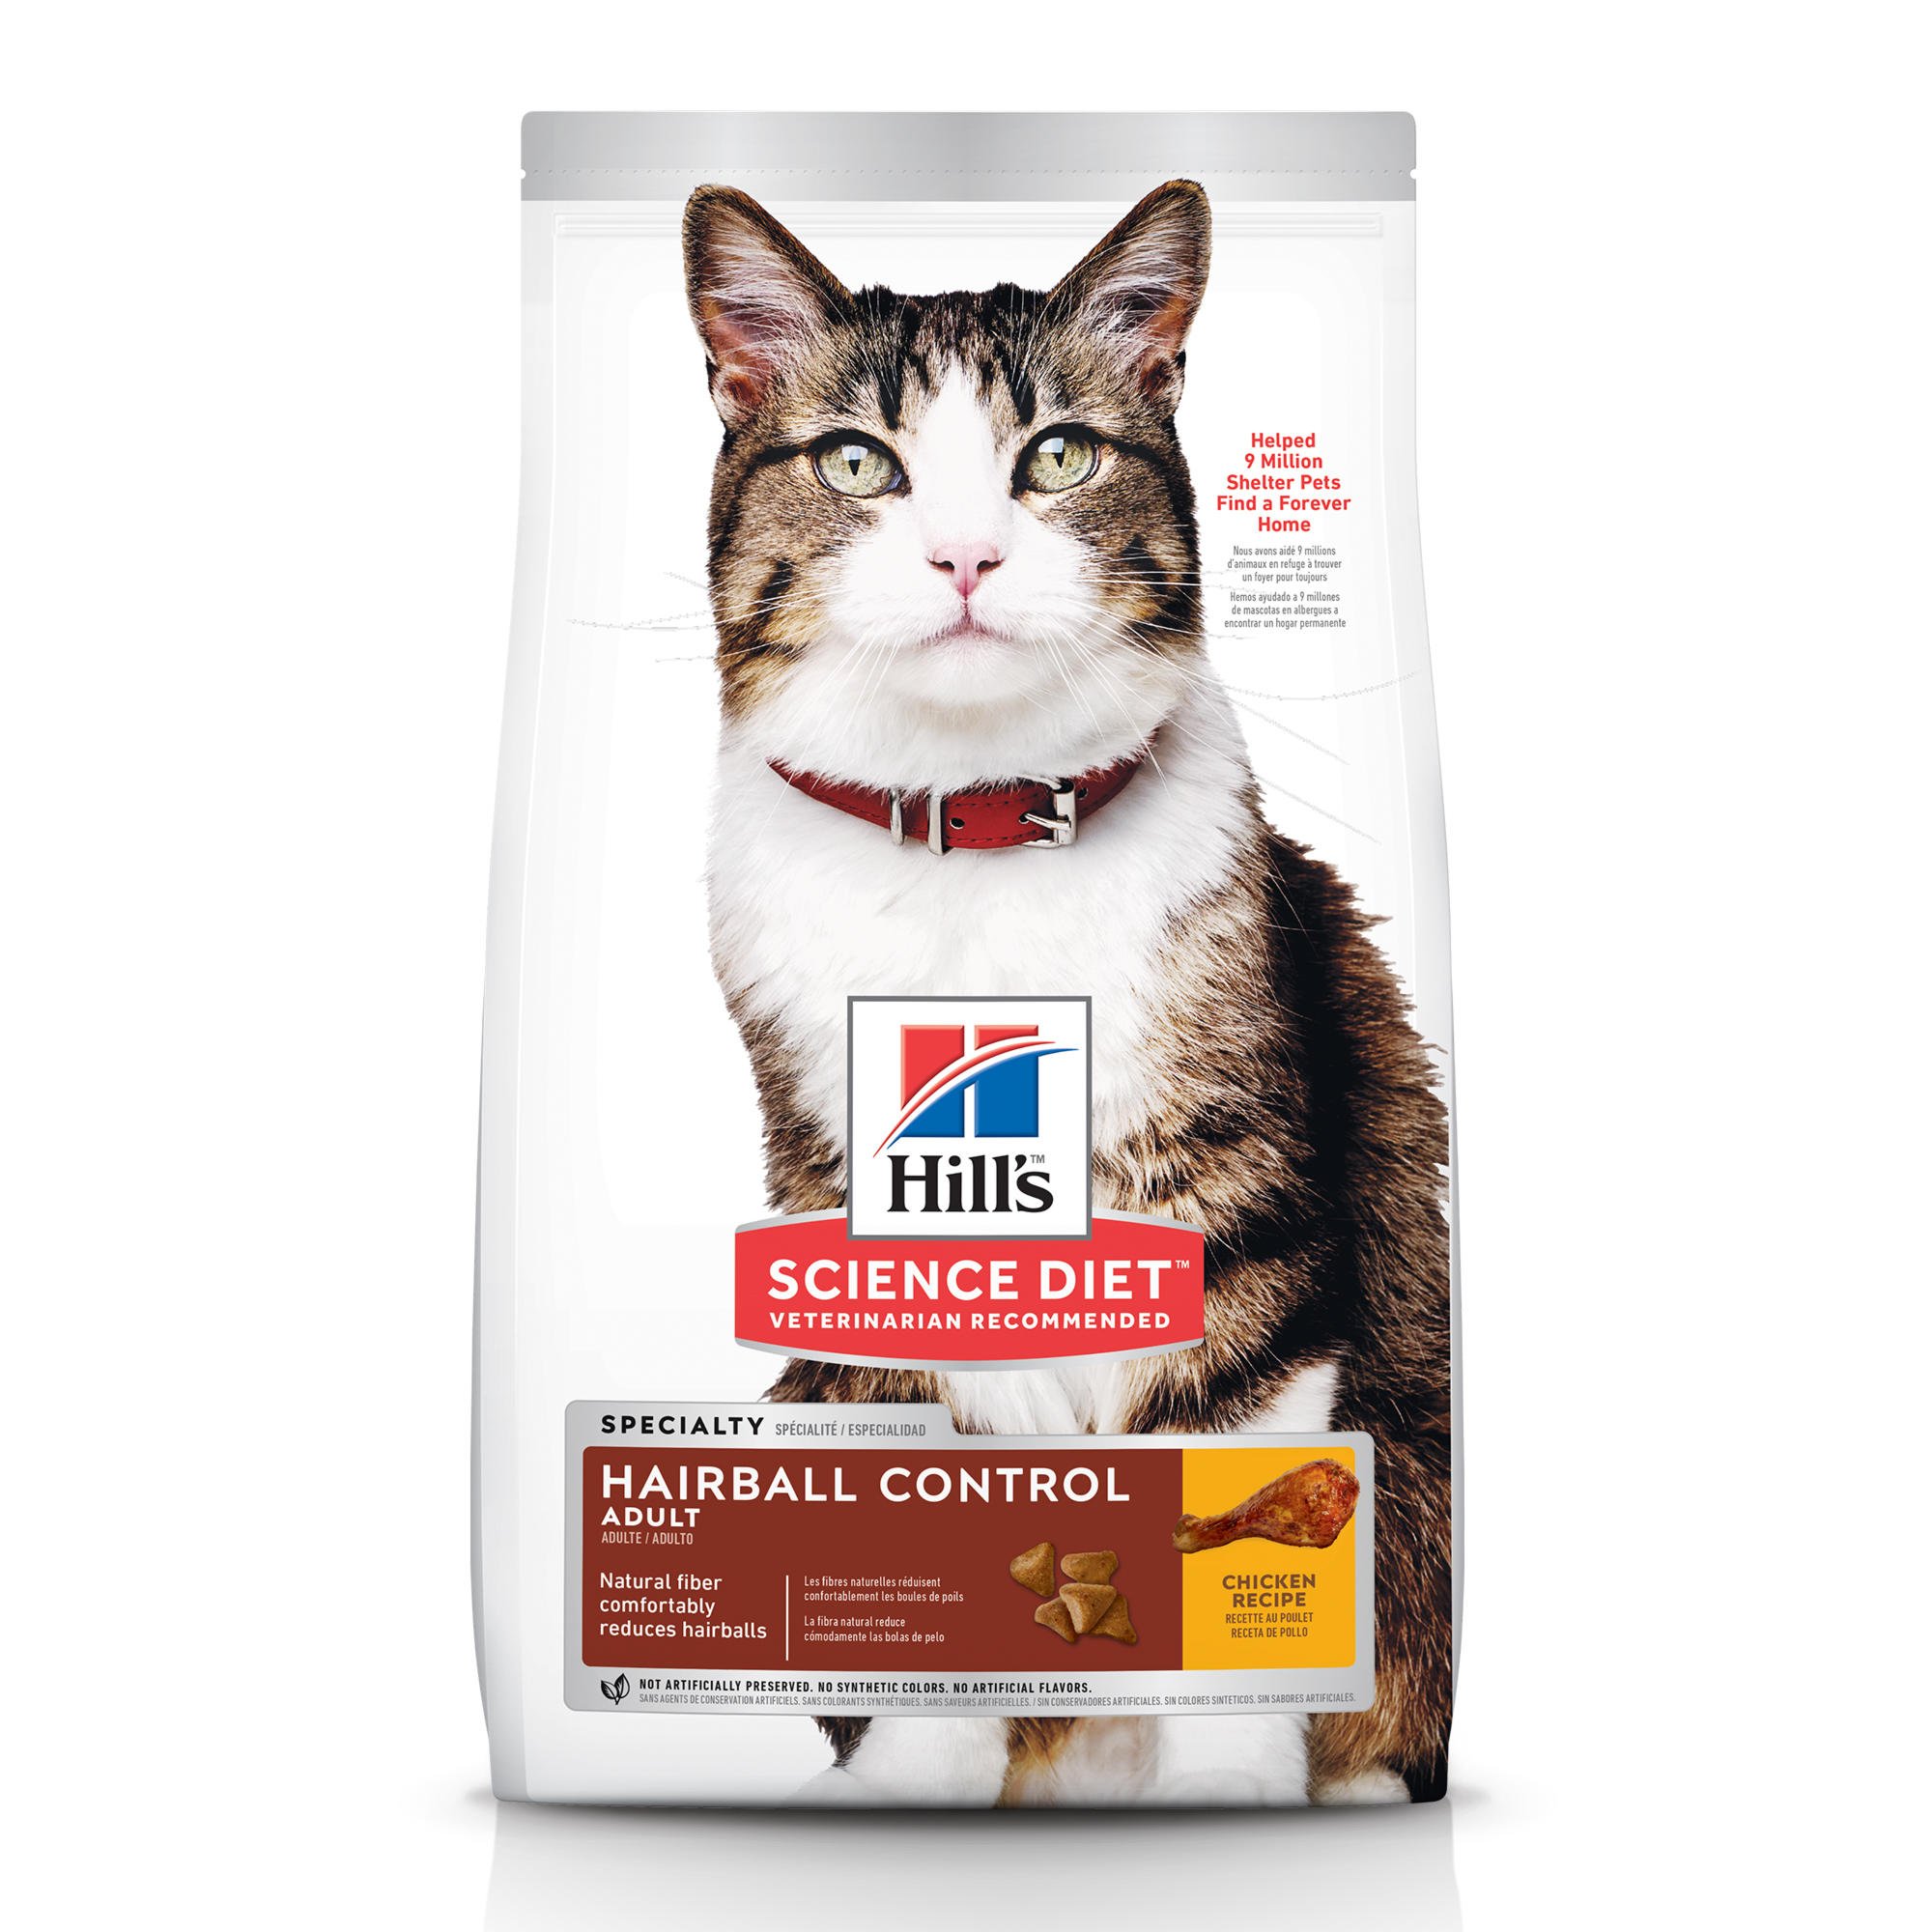 Hill's Science Diet Hairball Control Adult Dry Cat Food, 7 lbs. Petco